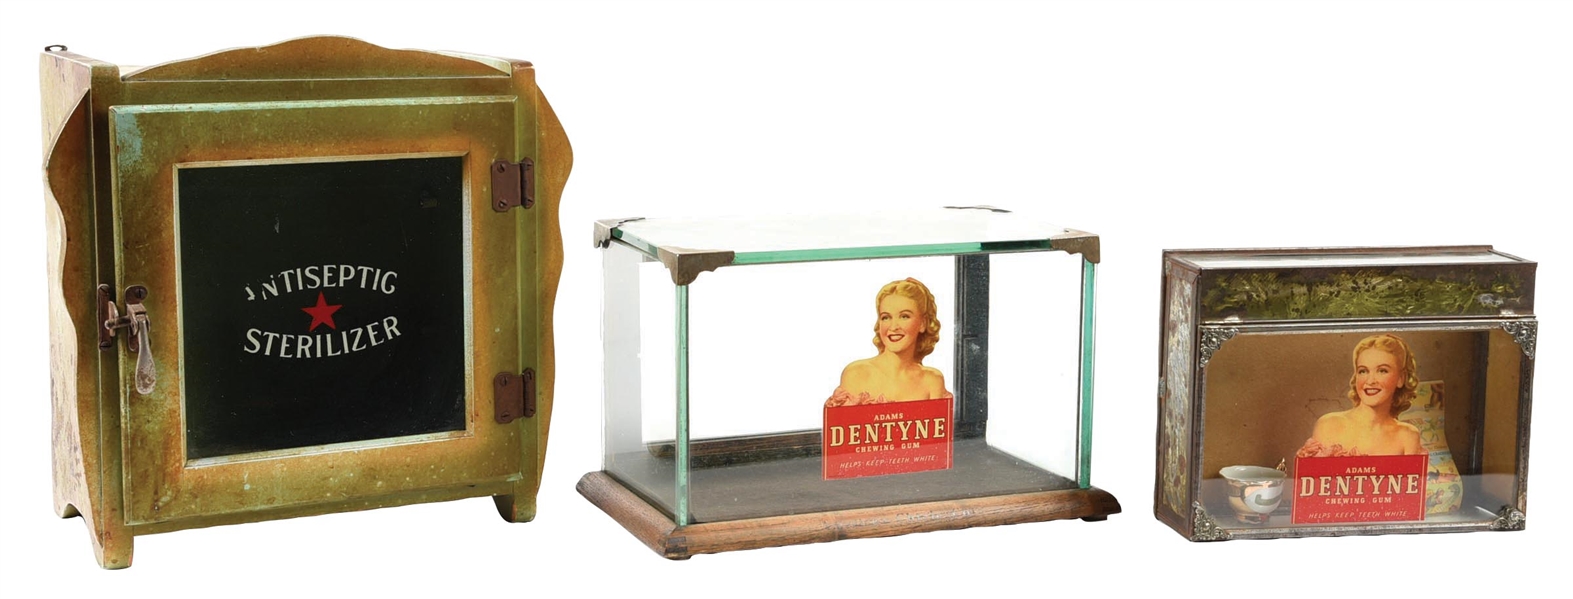 COLLECTION OF 3: COUNTRY STORE DENTYNE GUM & ANTISEPTIC SELTZER DISPLAY CASES